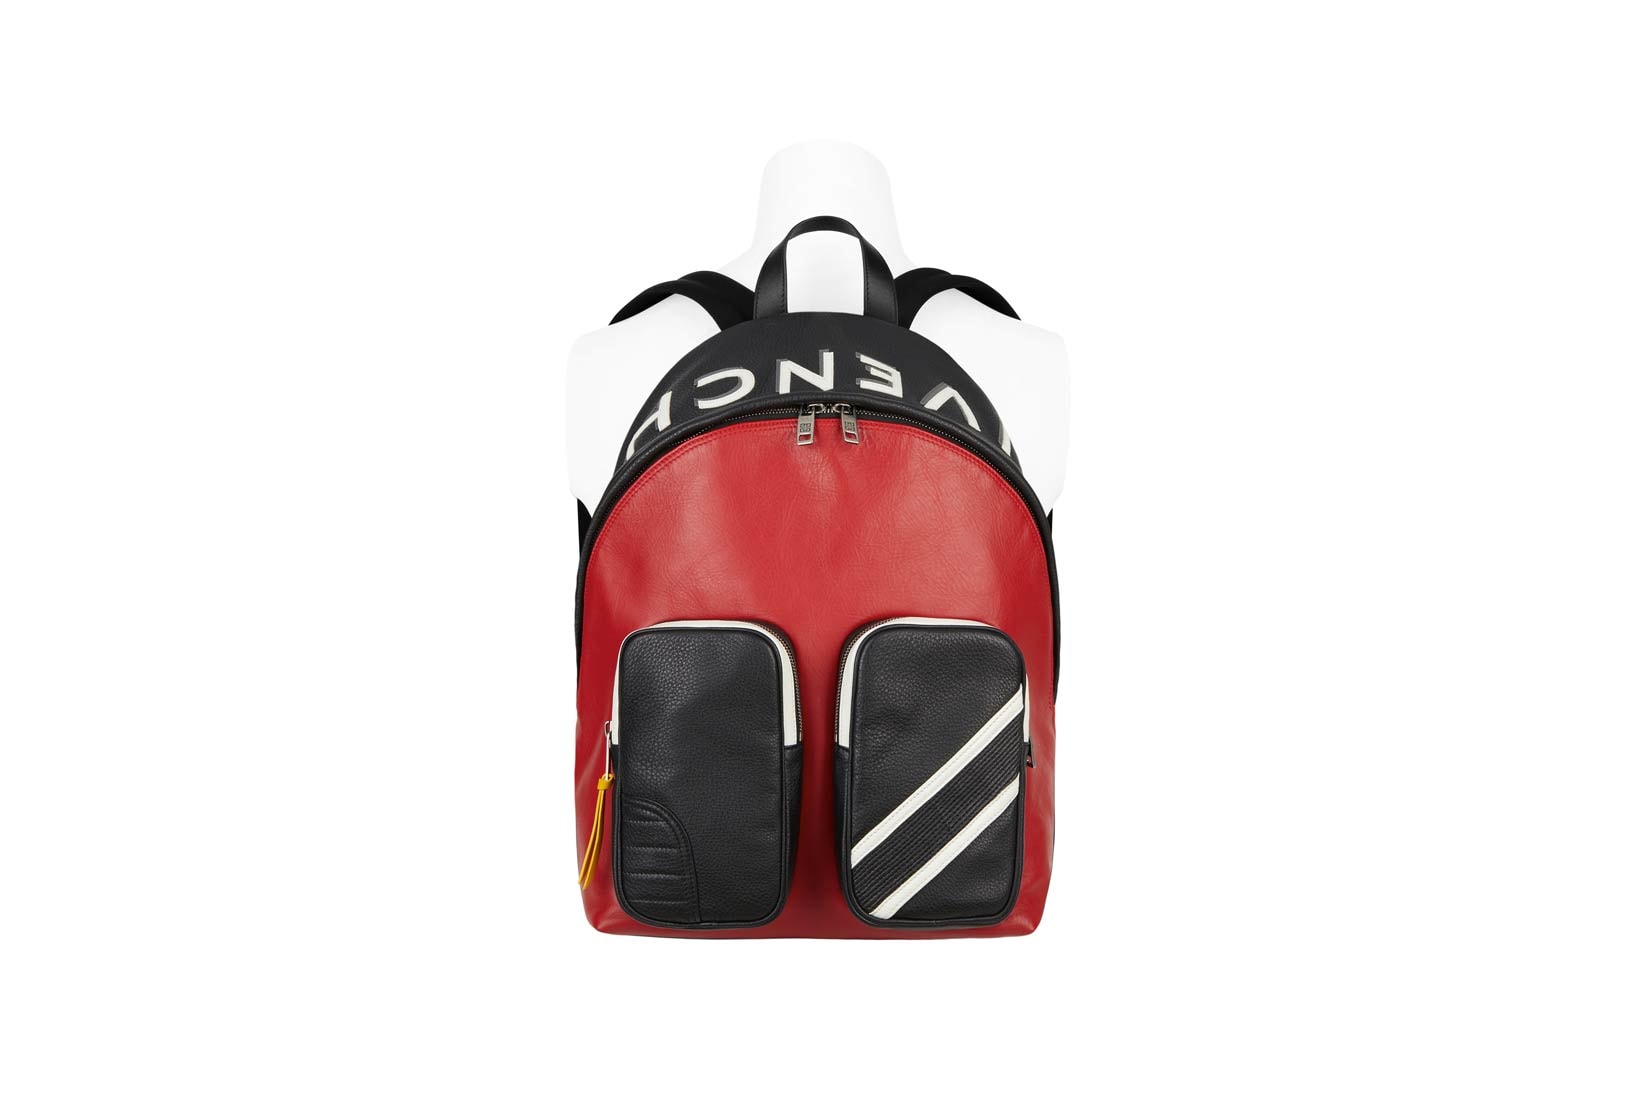 Givenchy Pre-Fall 2018 Motocross Backpack Black Red